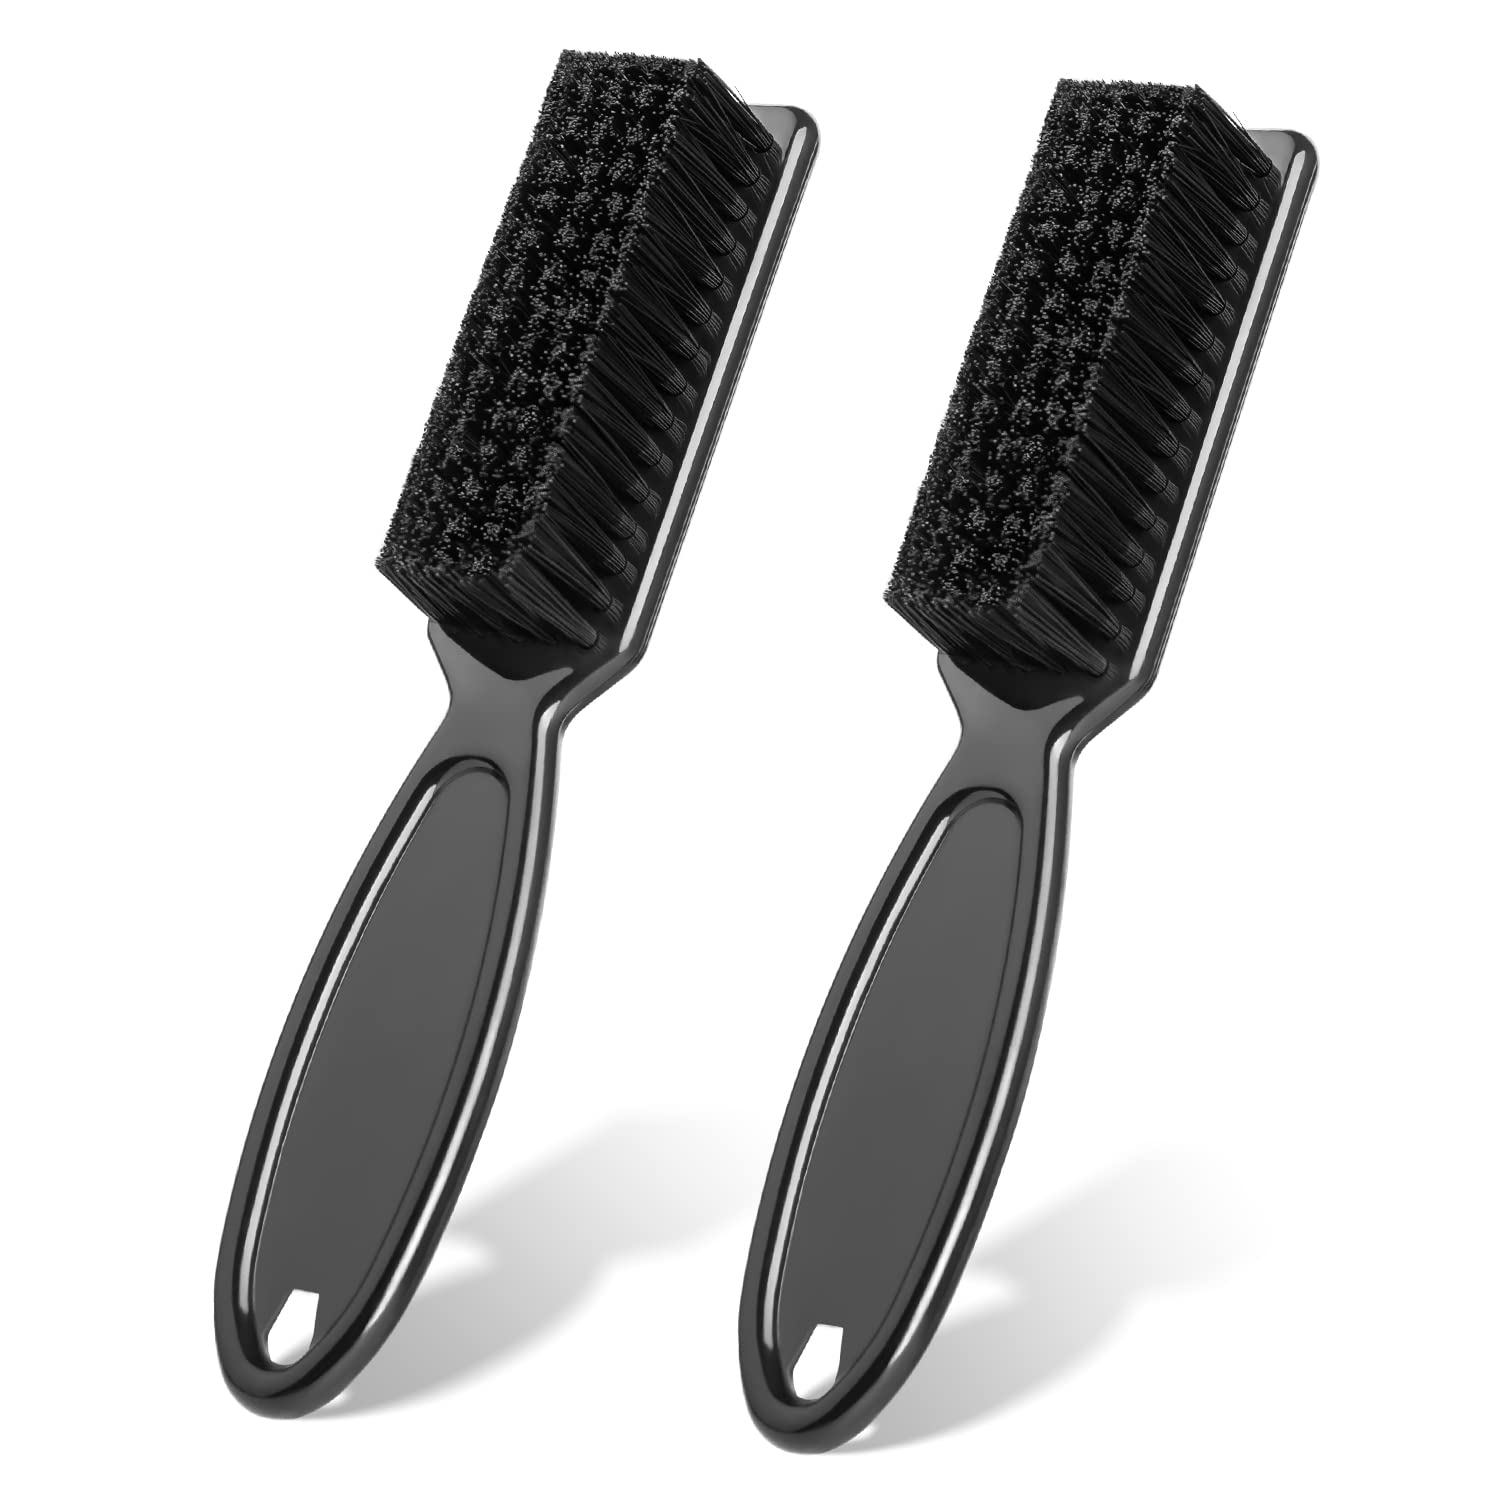 Andis Black Clipper Cleaning Brush